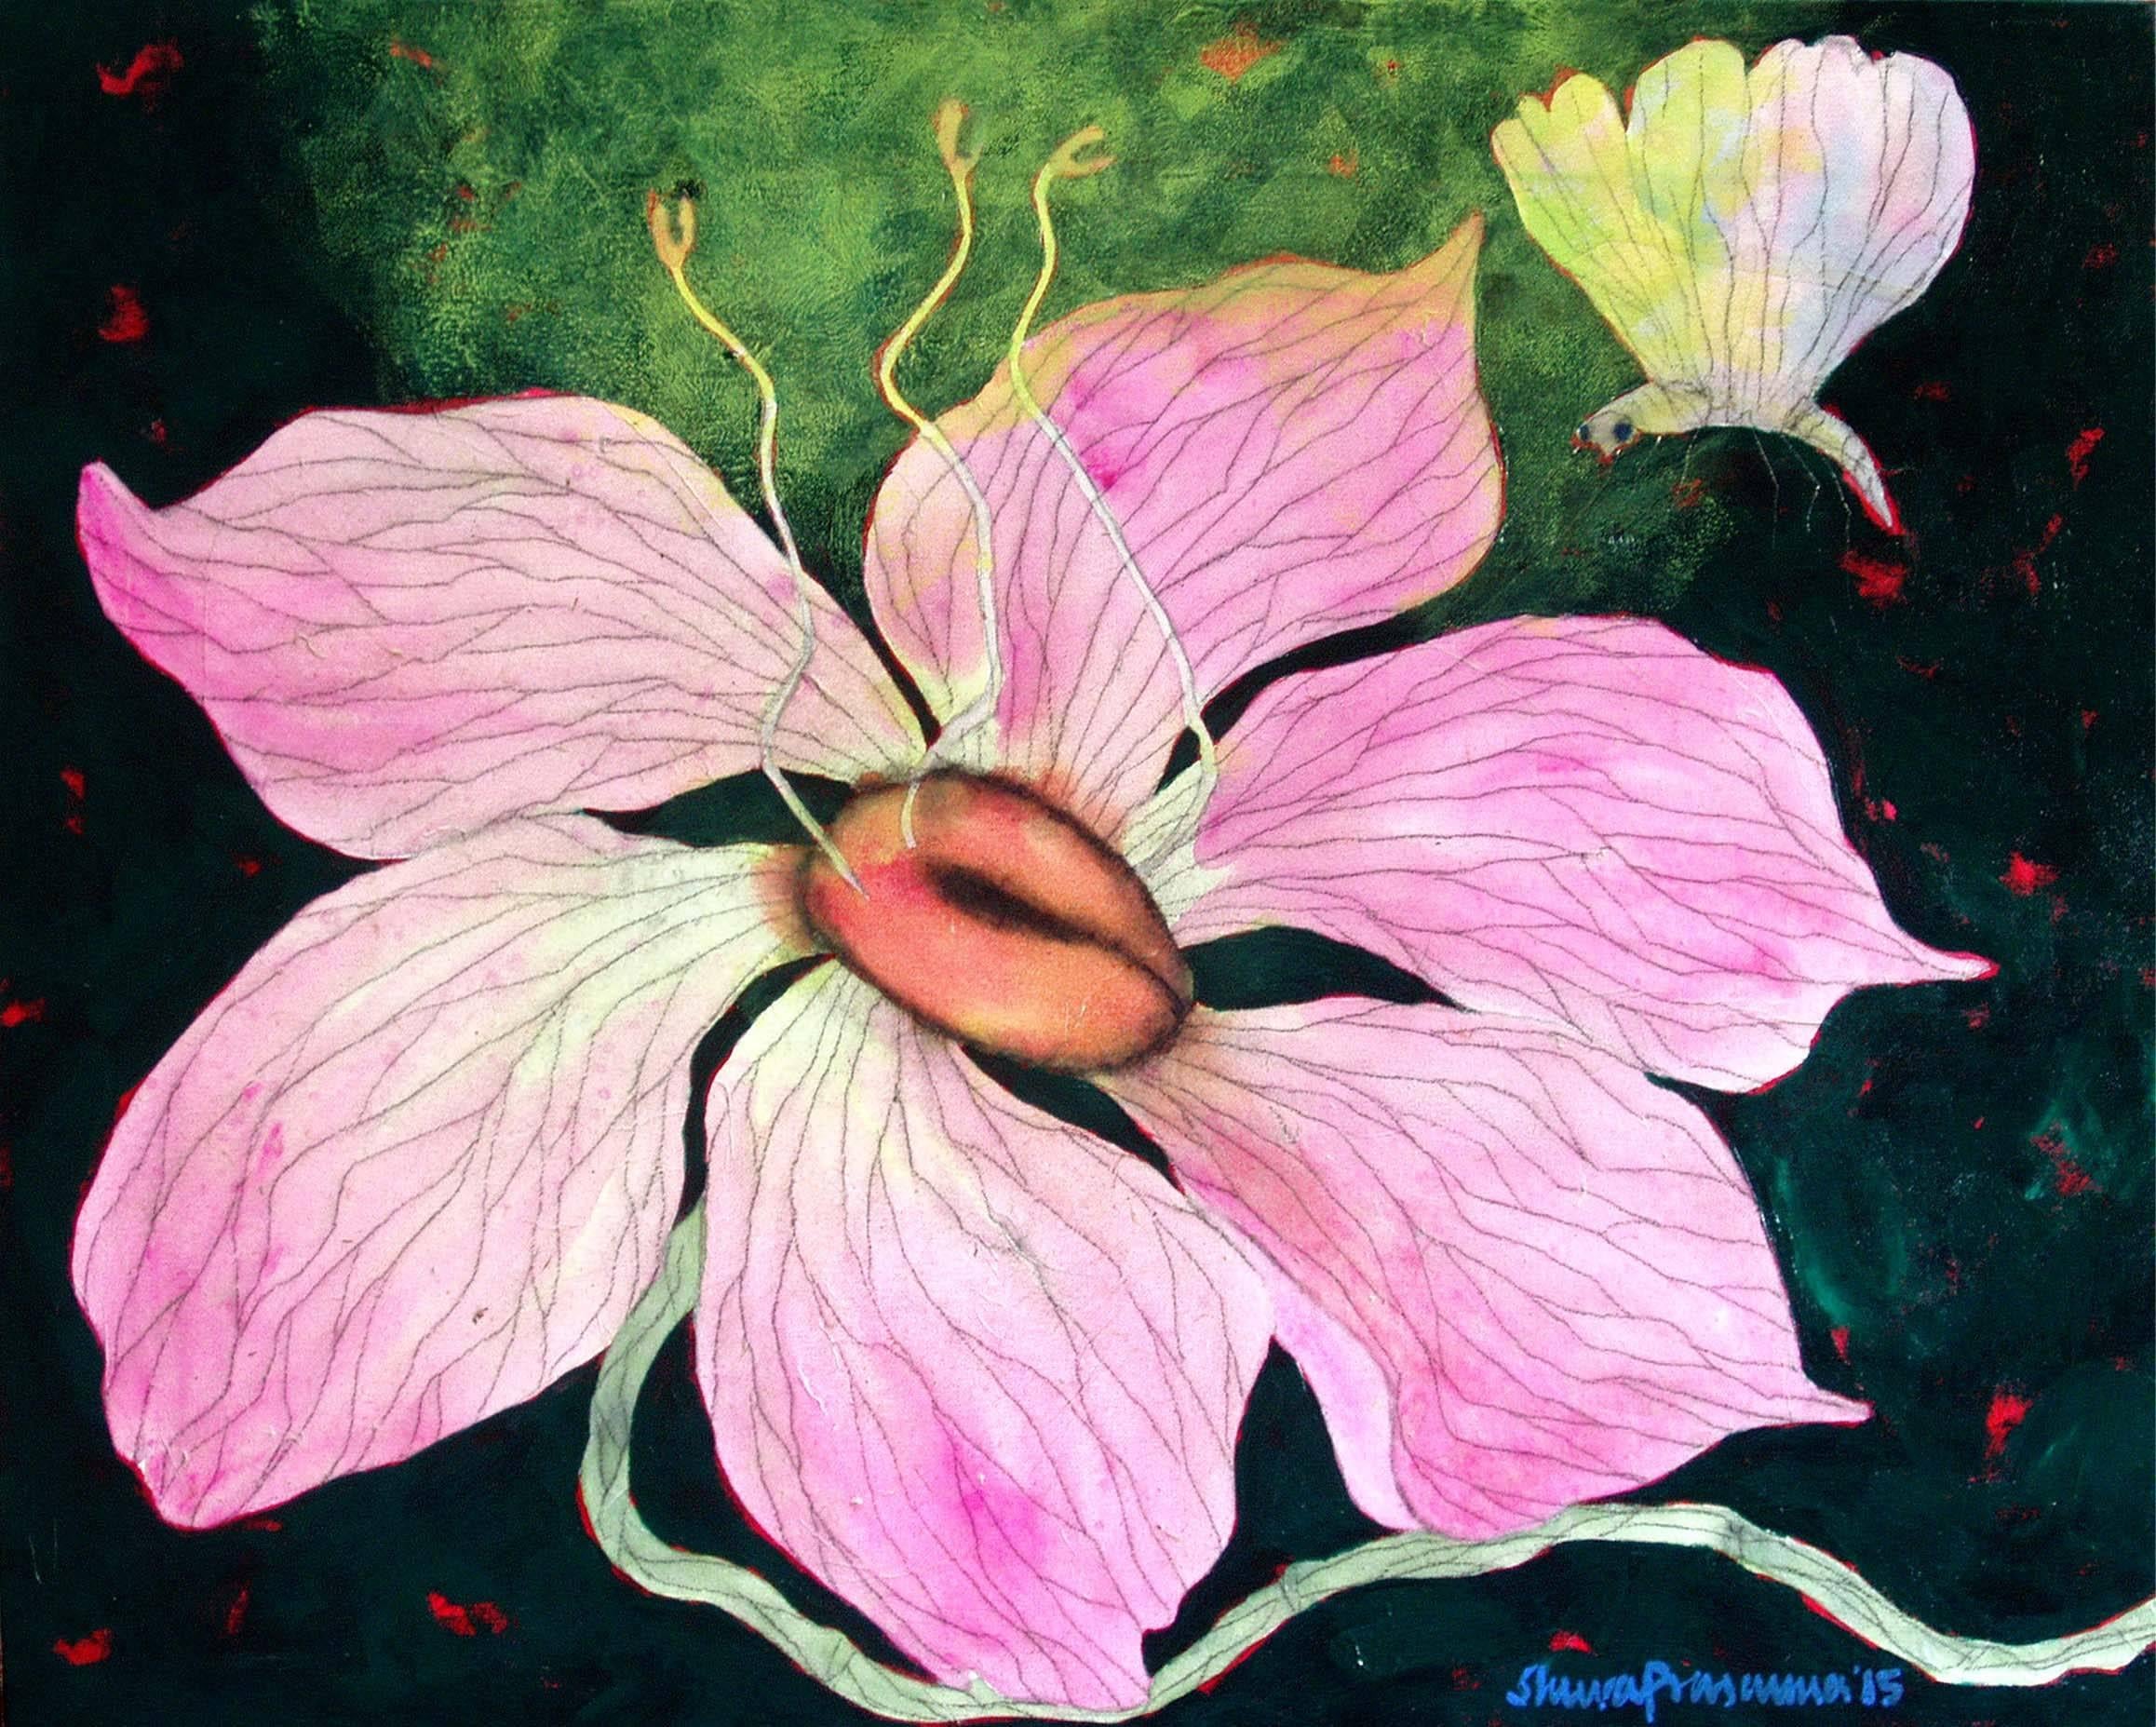 Shuvaprasanna Bhattacharya Still-Life Painting - Illusion, Acrylic, Charcoal & Oil on Canvas, Pink by Modern Artist "In Stock"